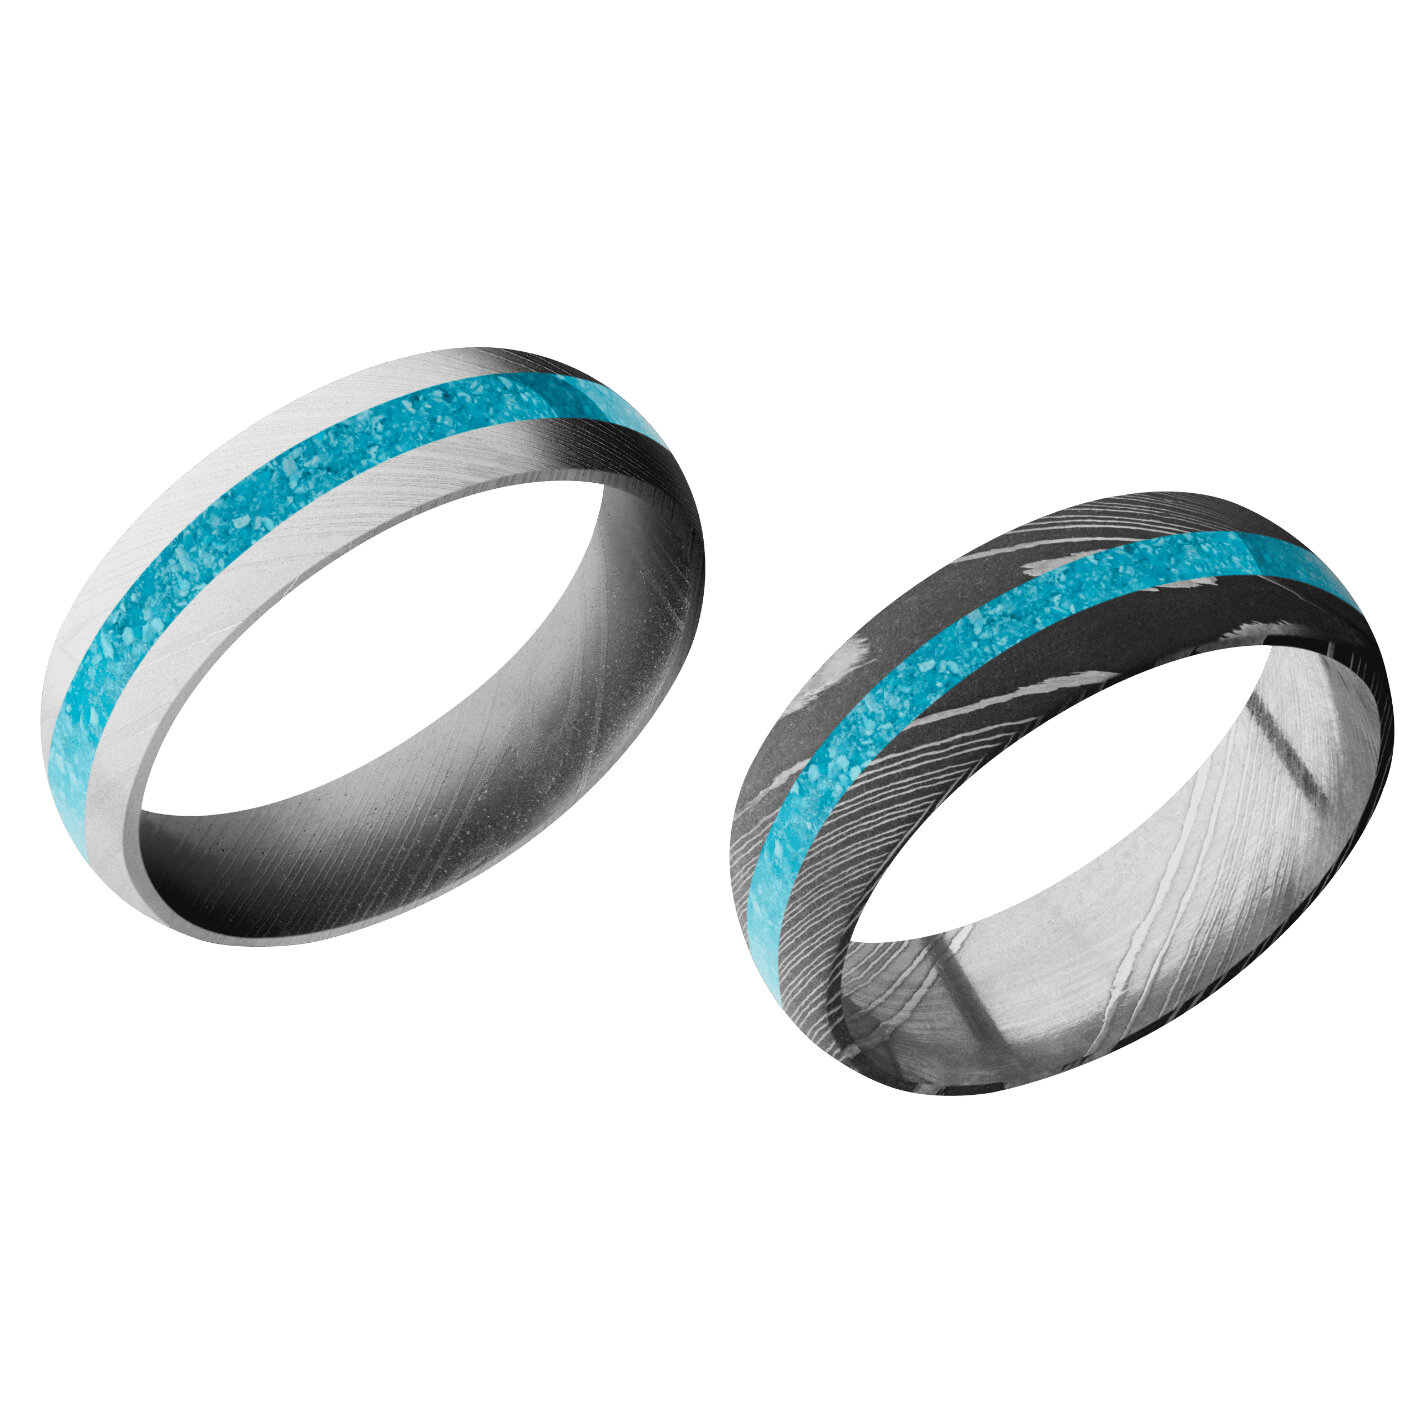 Damascus Steel Wedding Ring with 2 mm Turquoise Inlay